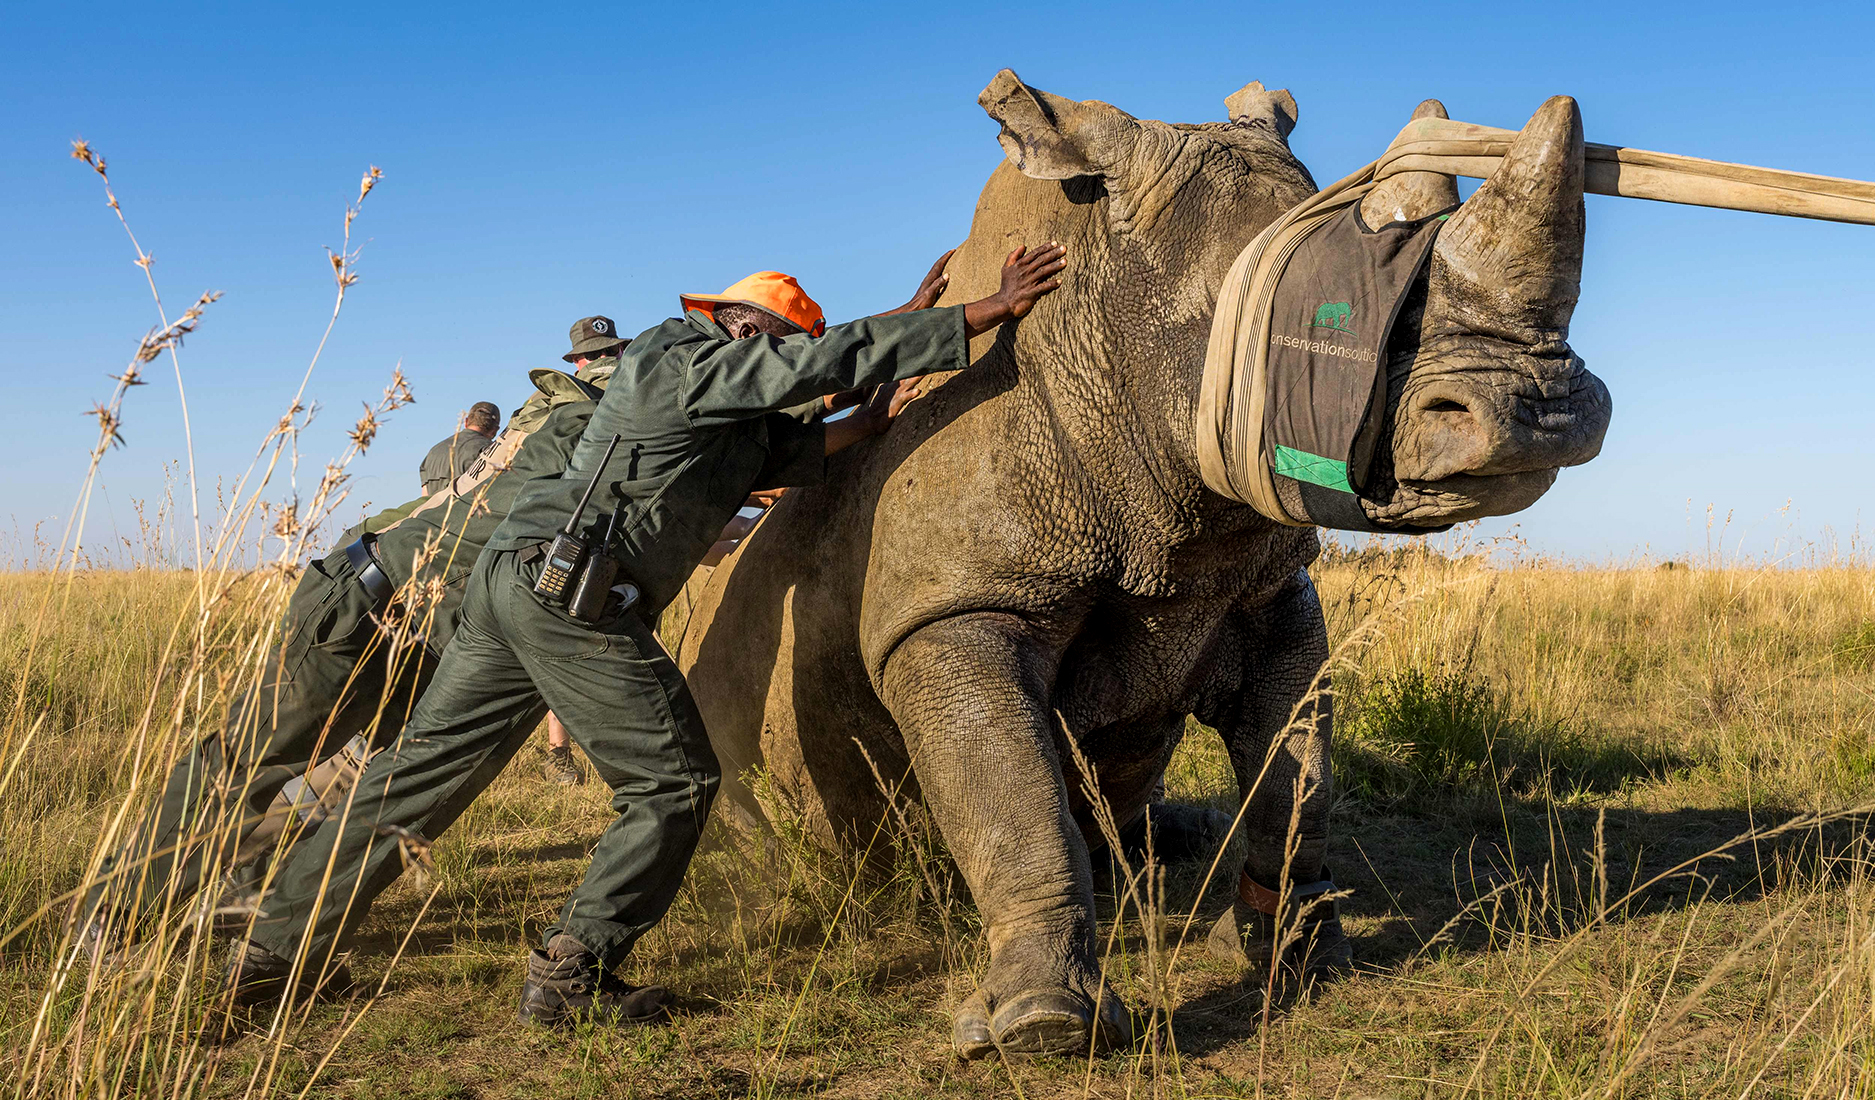 Truckloads of hope arrive in KZN as 40 rhinos are dropped off at Munywana conservancy